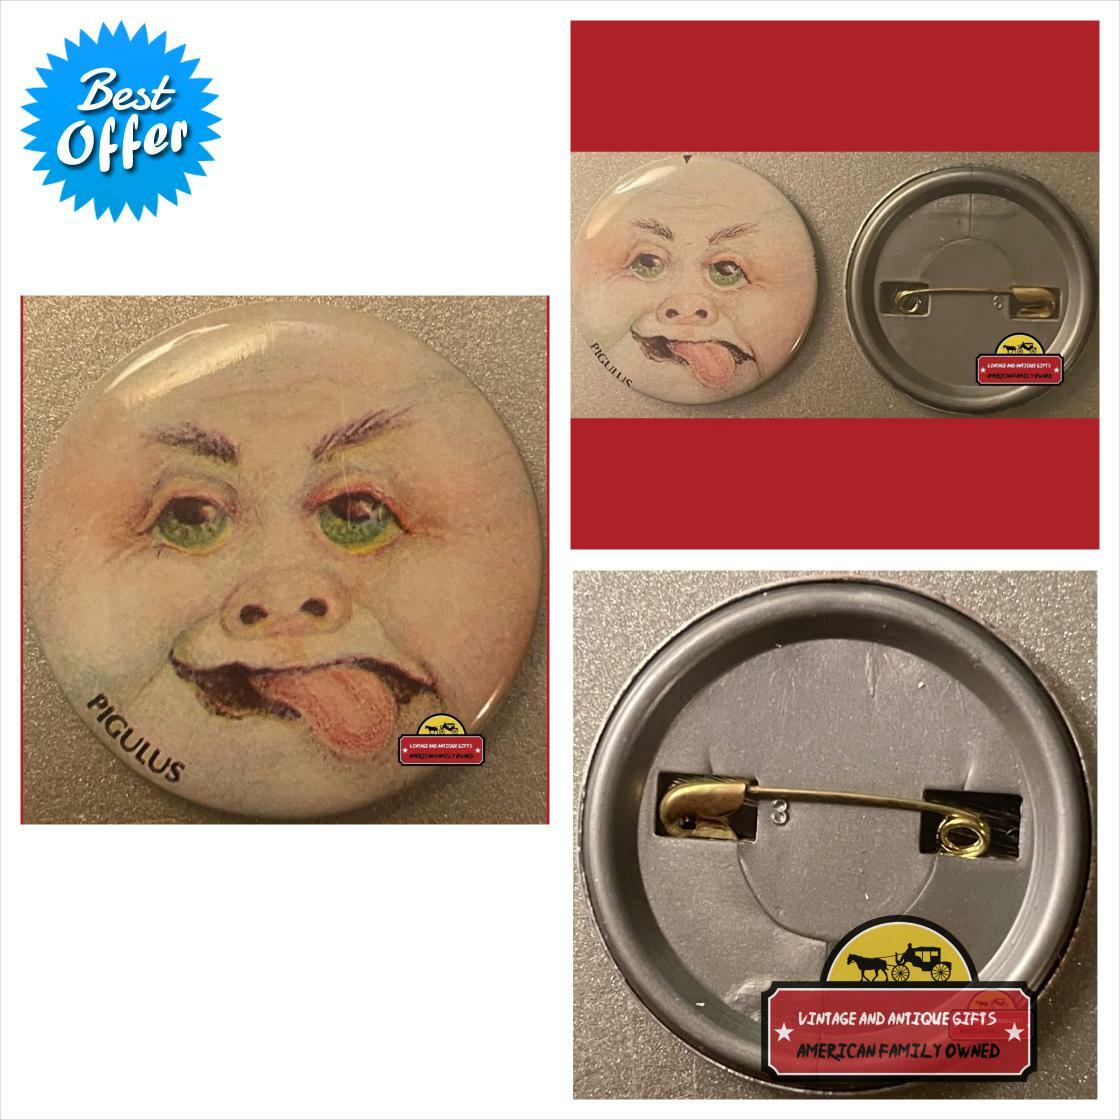 Smart Buys! Vintage 1980s Pigulus Pin Madballs And Garbage Pail Kids Inspired starting from $4.89 at vintageantiquesgifts.com/products/vinta… See more. 🤓 #giftsfordad #vintagegifts